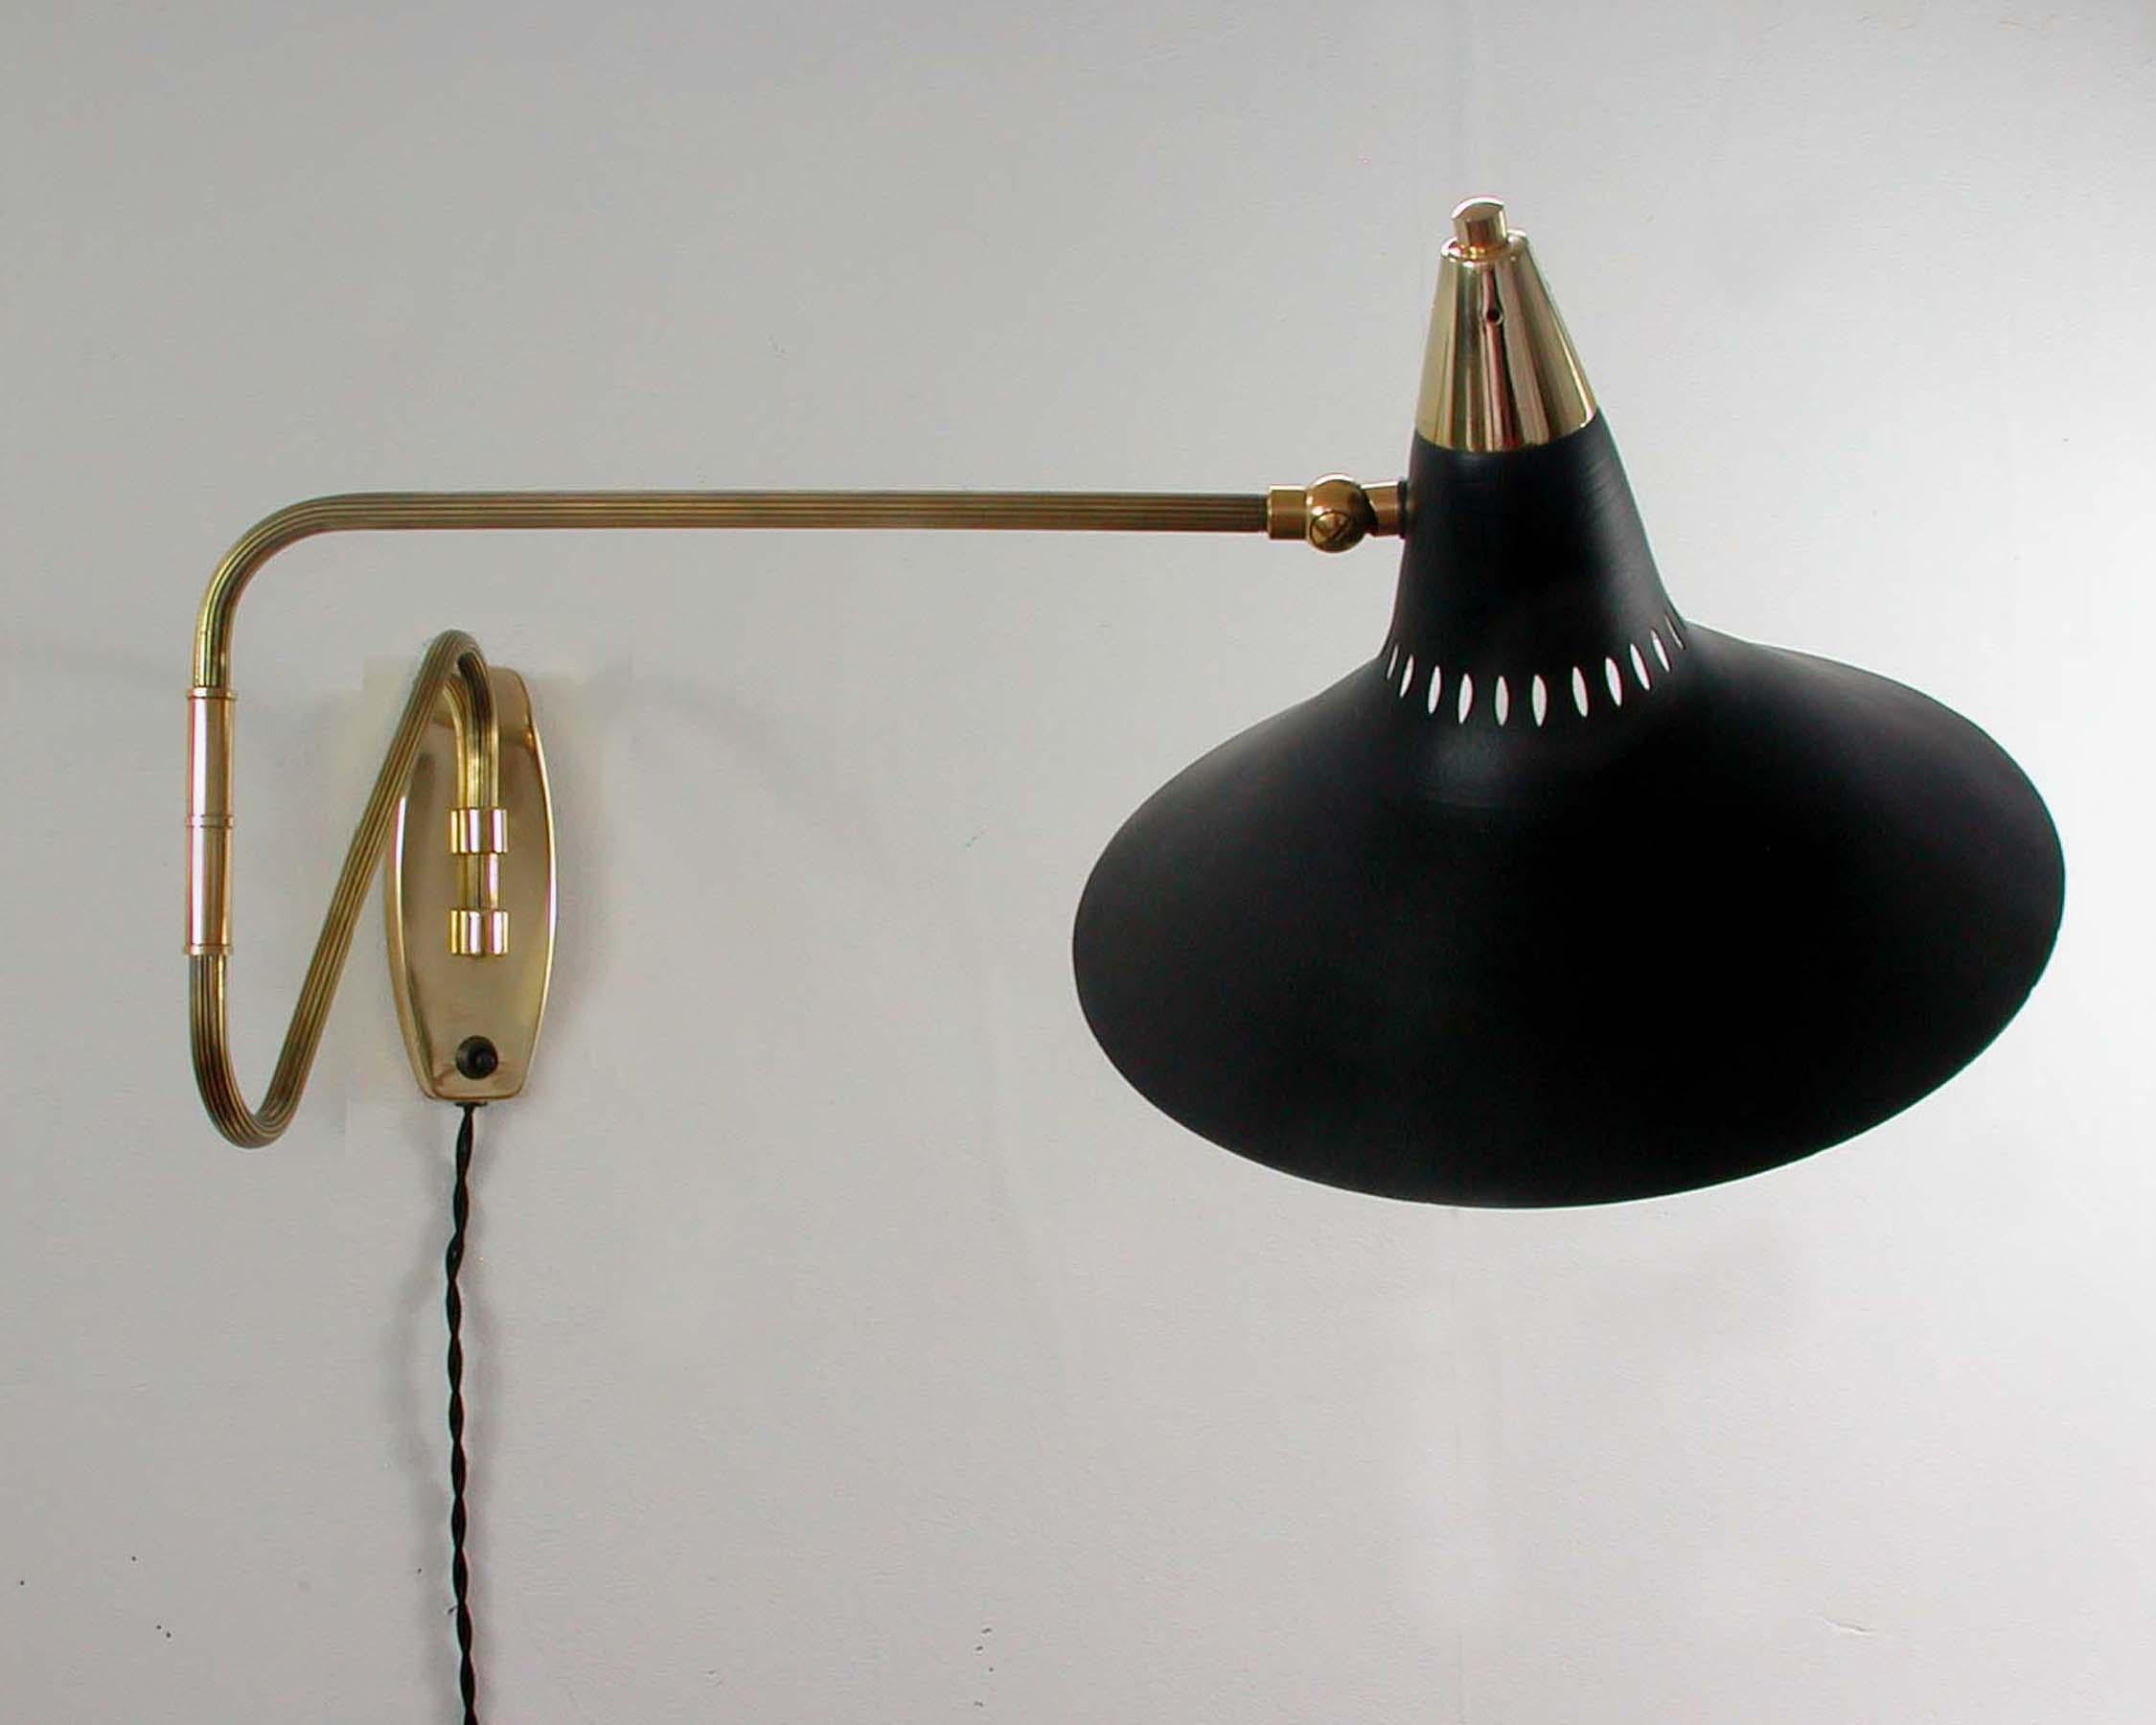 Lacquered Midcentury Swedish Black and Brass Articulating Wall Light Sconce, 1950s